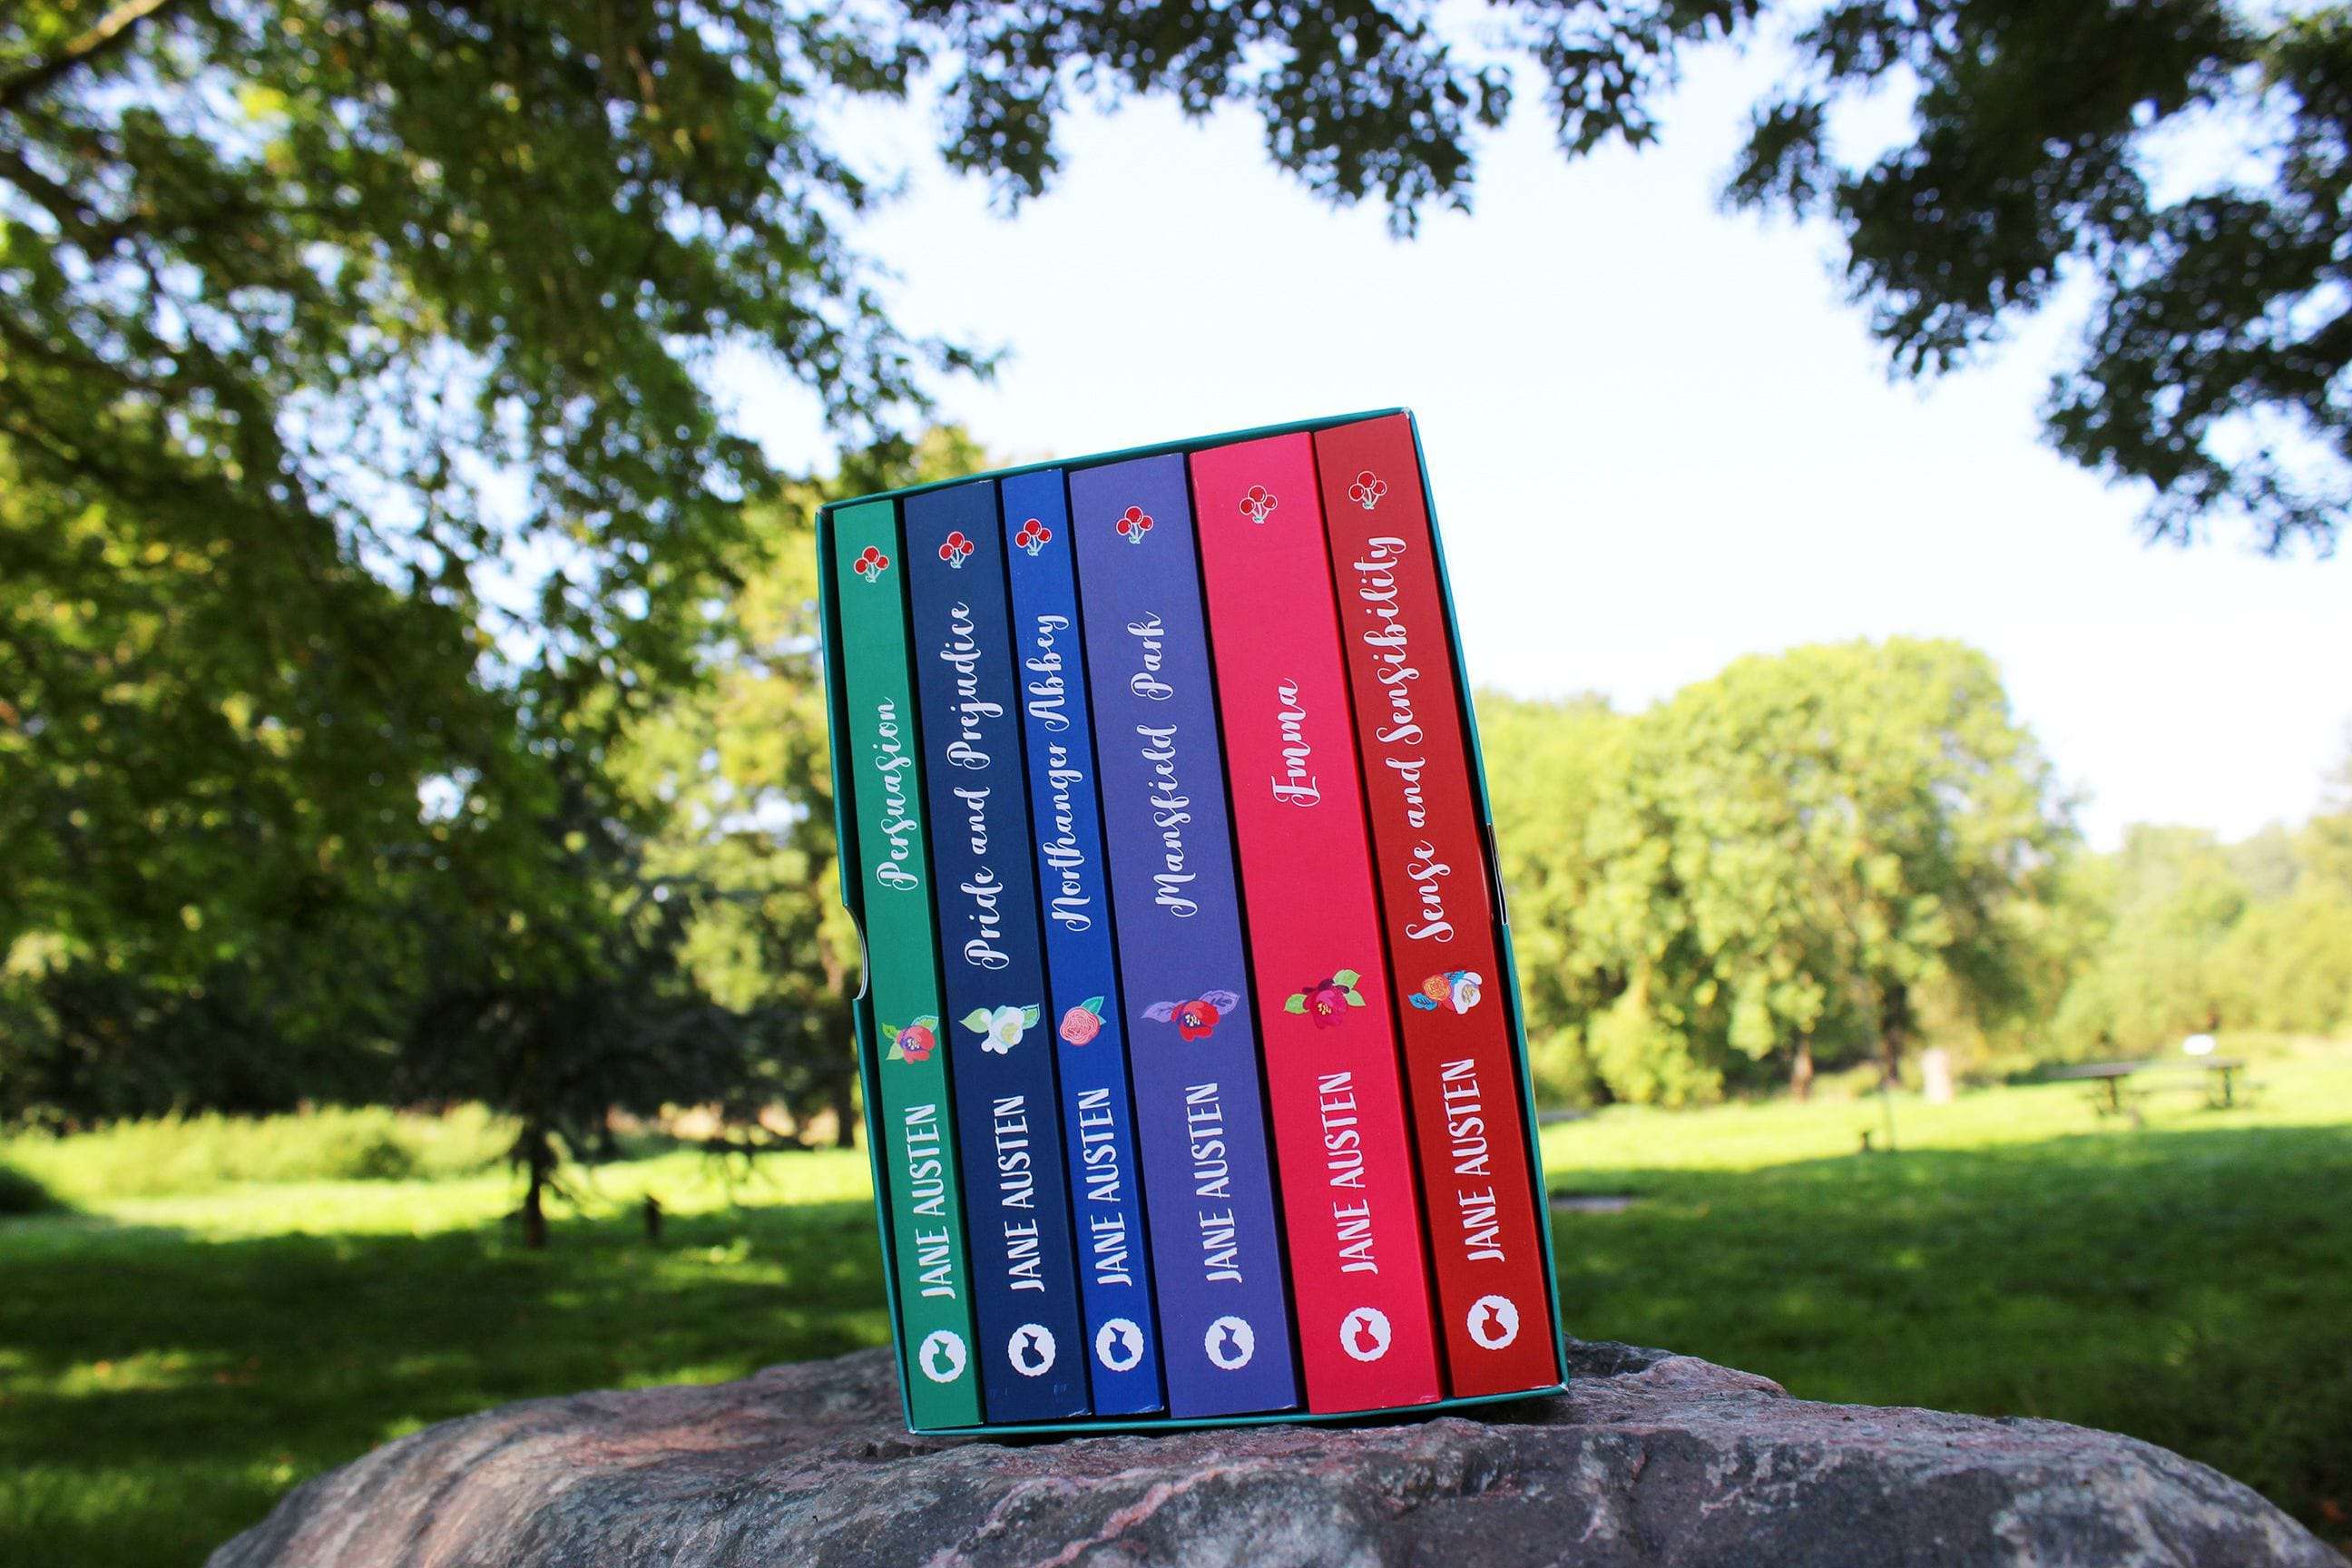 Jane Austen 6 Books Young Adult Collection Box Set Paperback by Jane Austen - St Stephens Books